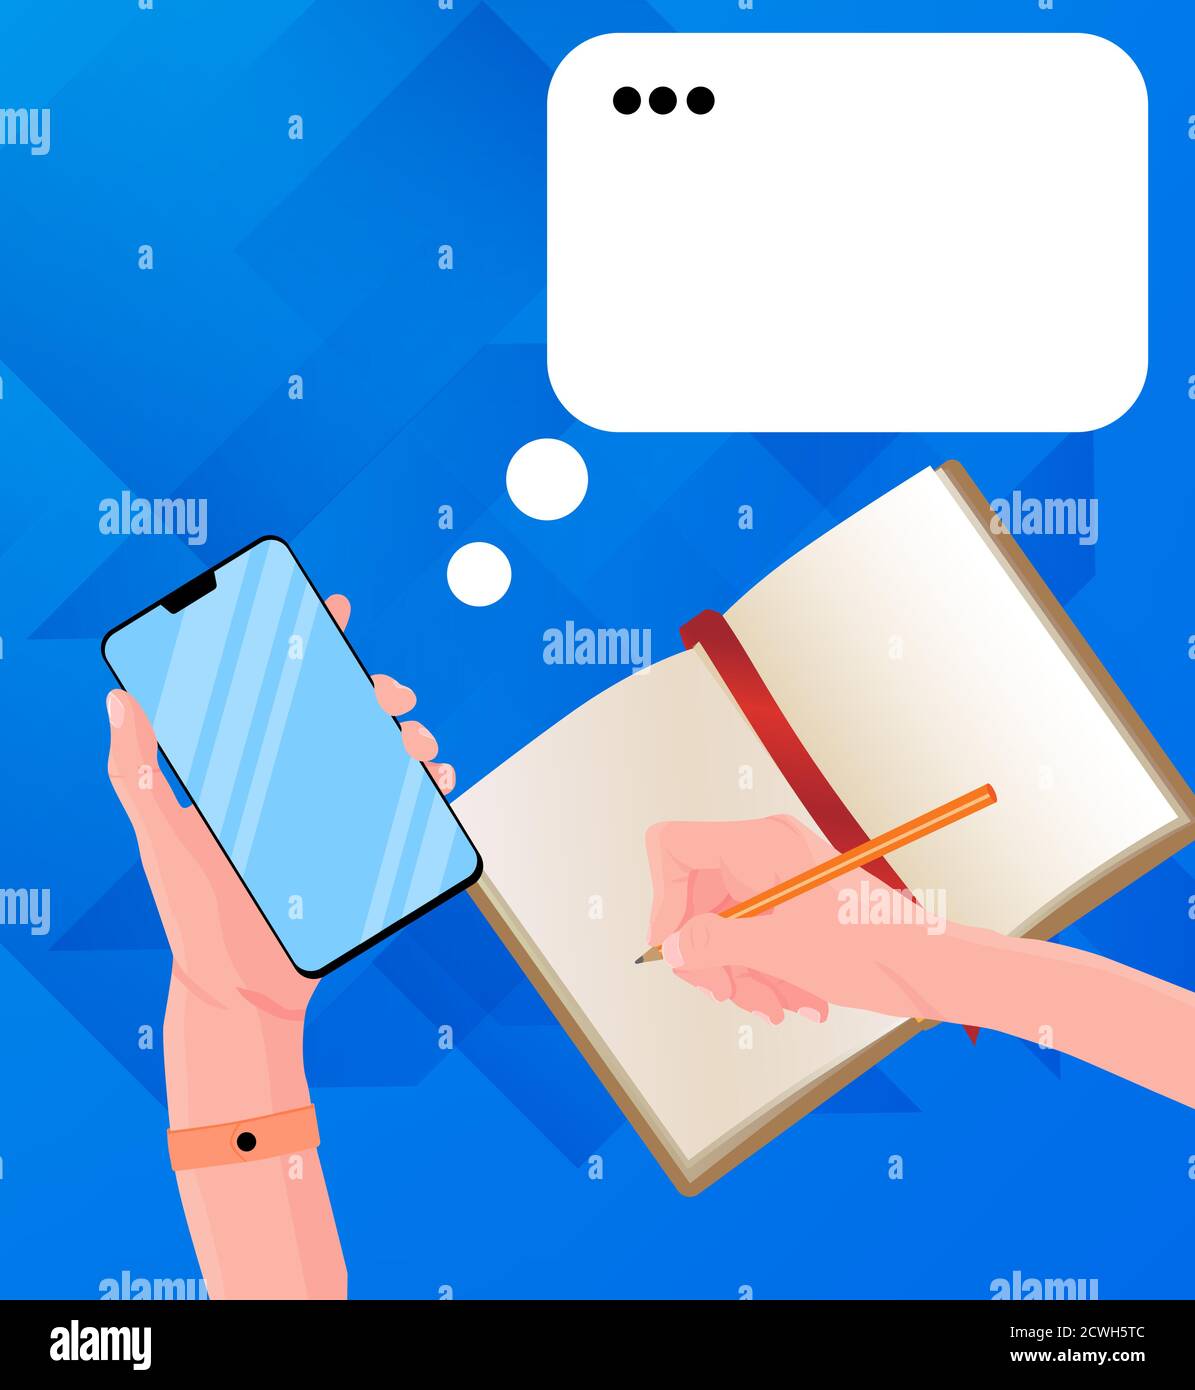 A girl has holding a smartphone in the hand, writing a message. In another hand she has holding a pencil and writing something in notebook. Work place Stock Vector